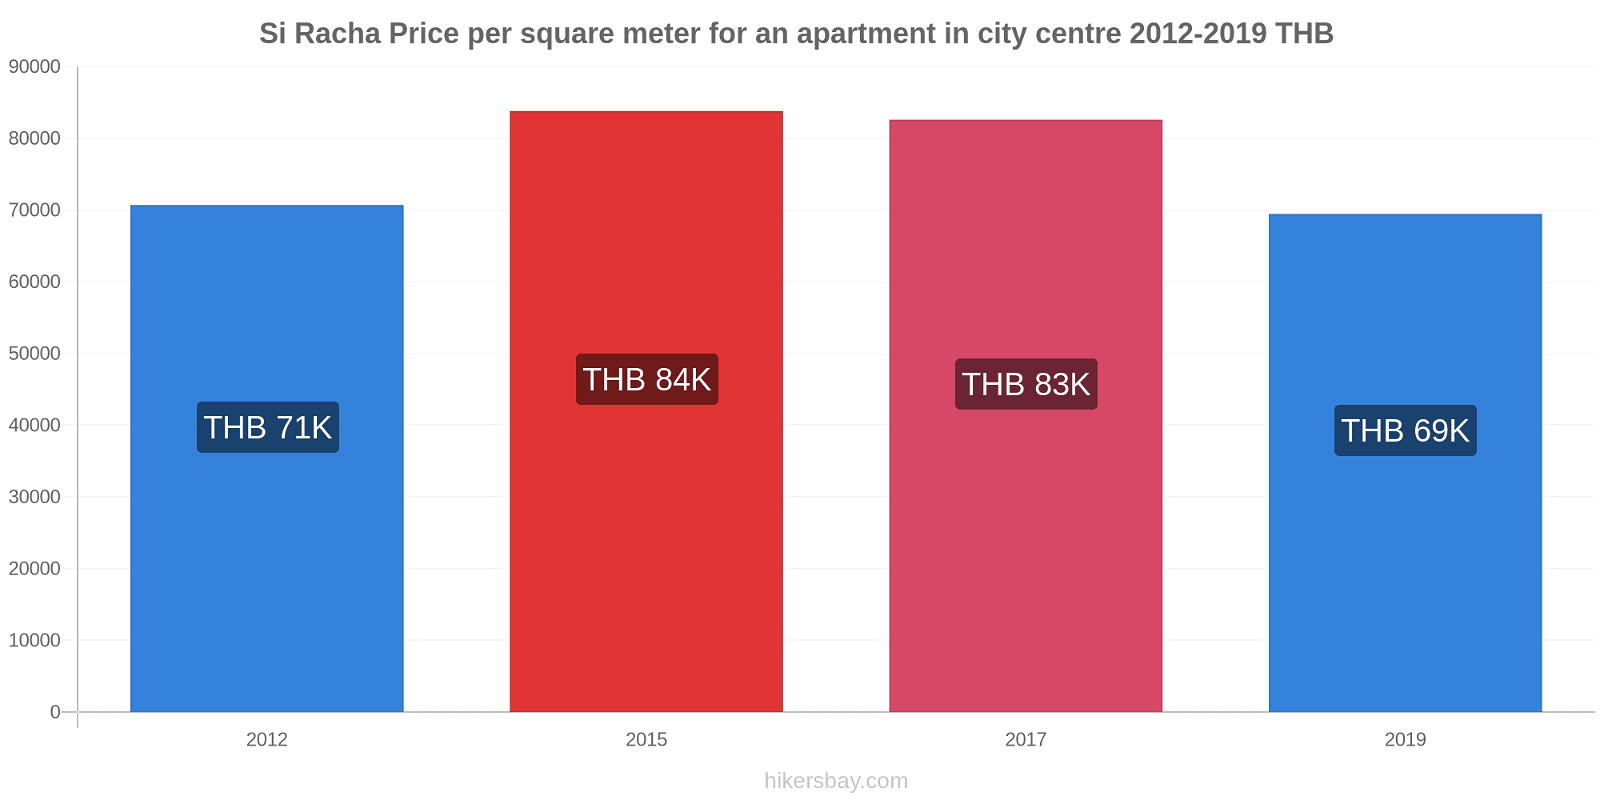 Si Racha price changes Price per square meter for an apartment in city centre hikersbay.com